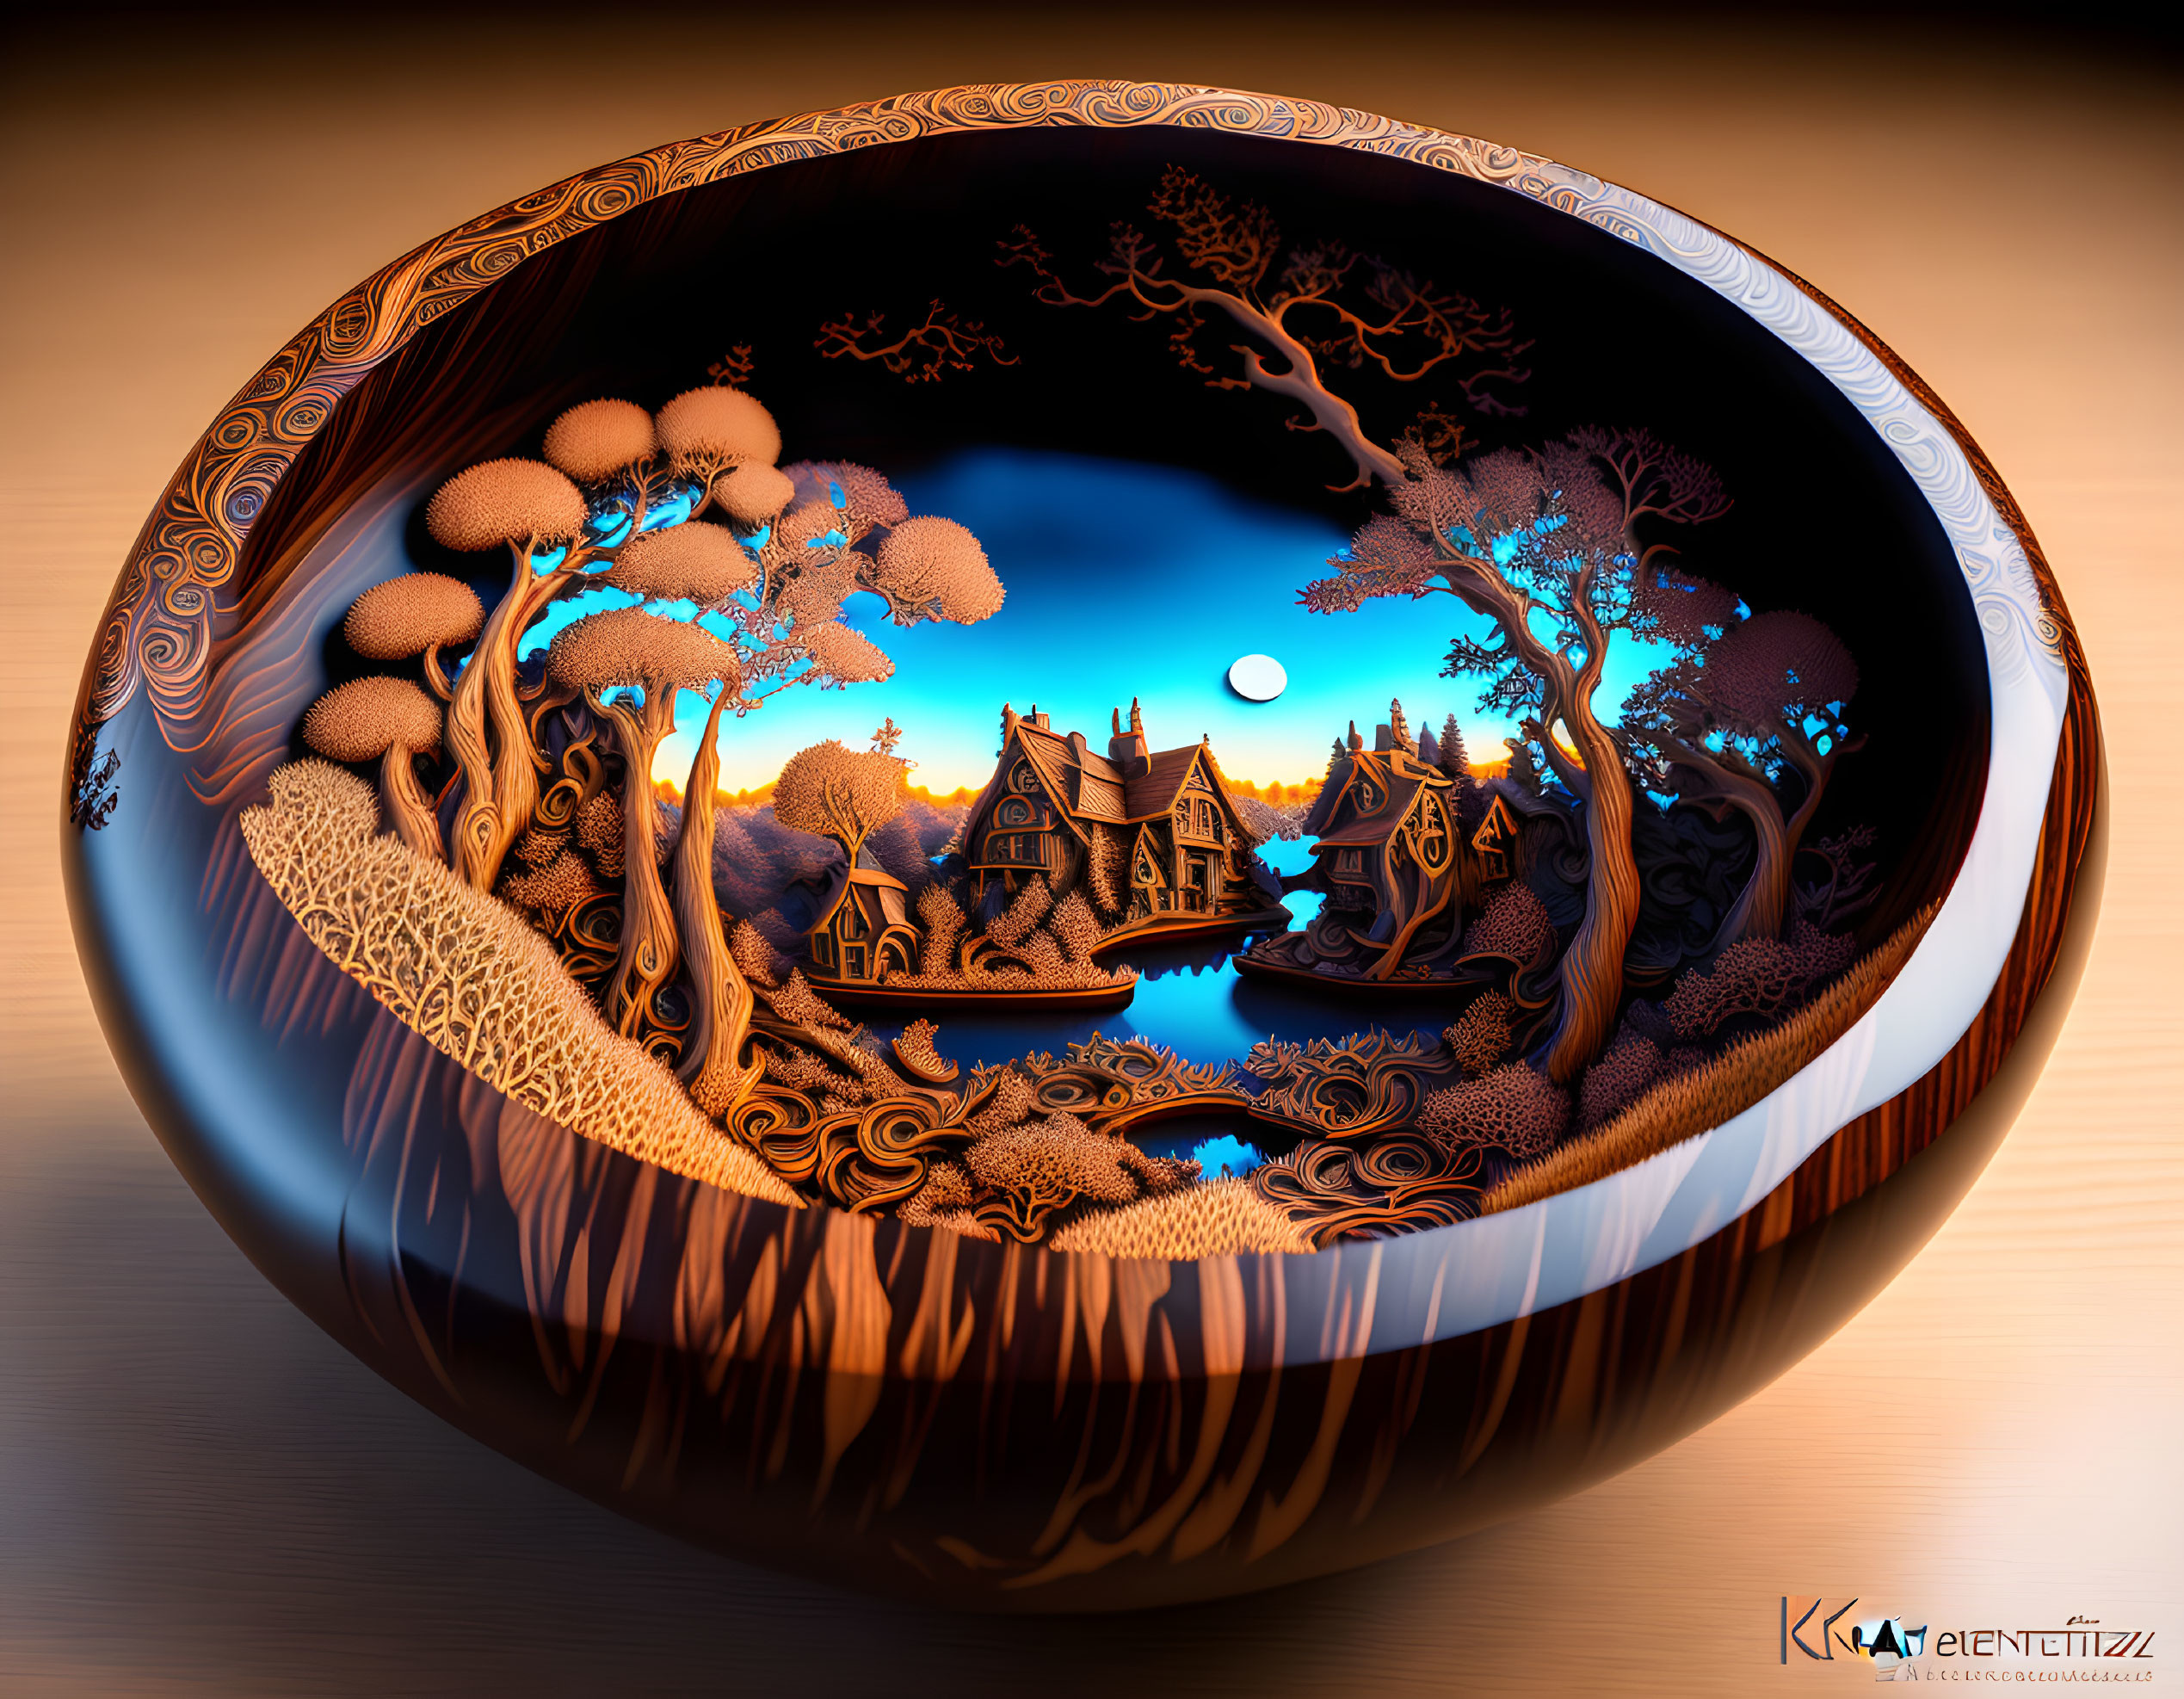 Miniature Fantasy Landscape in Wooden Bowl: 3D Art Piece with Trees, House, and Moon